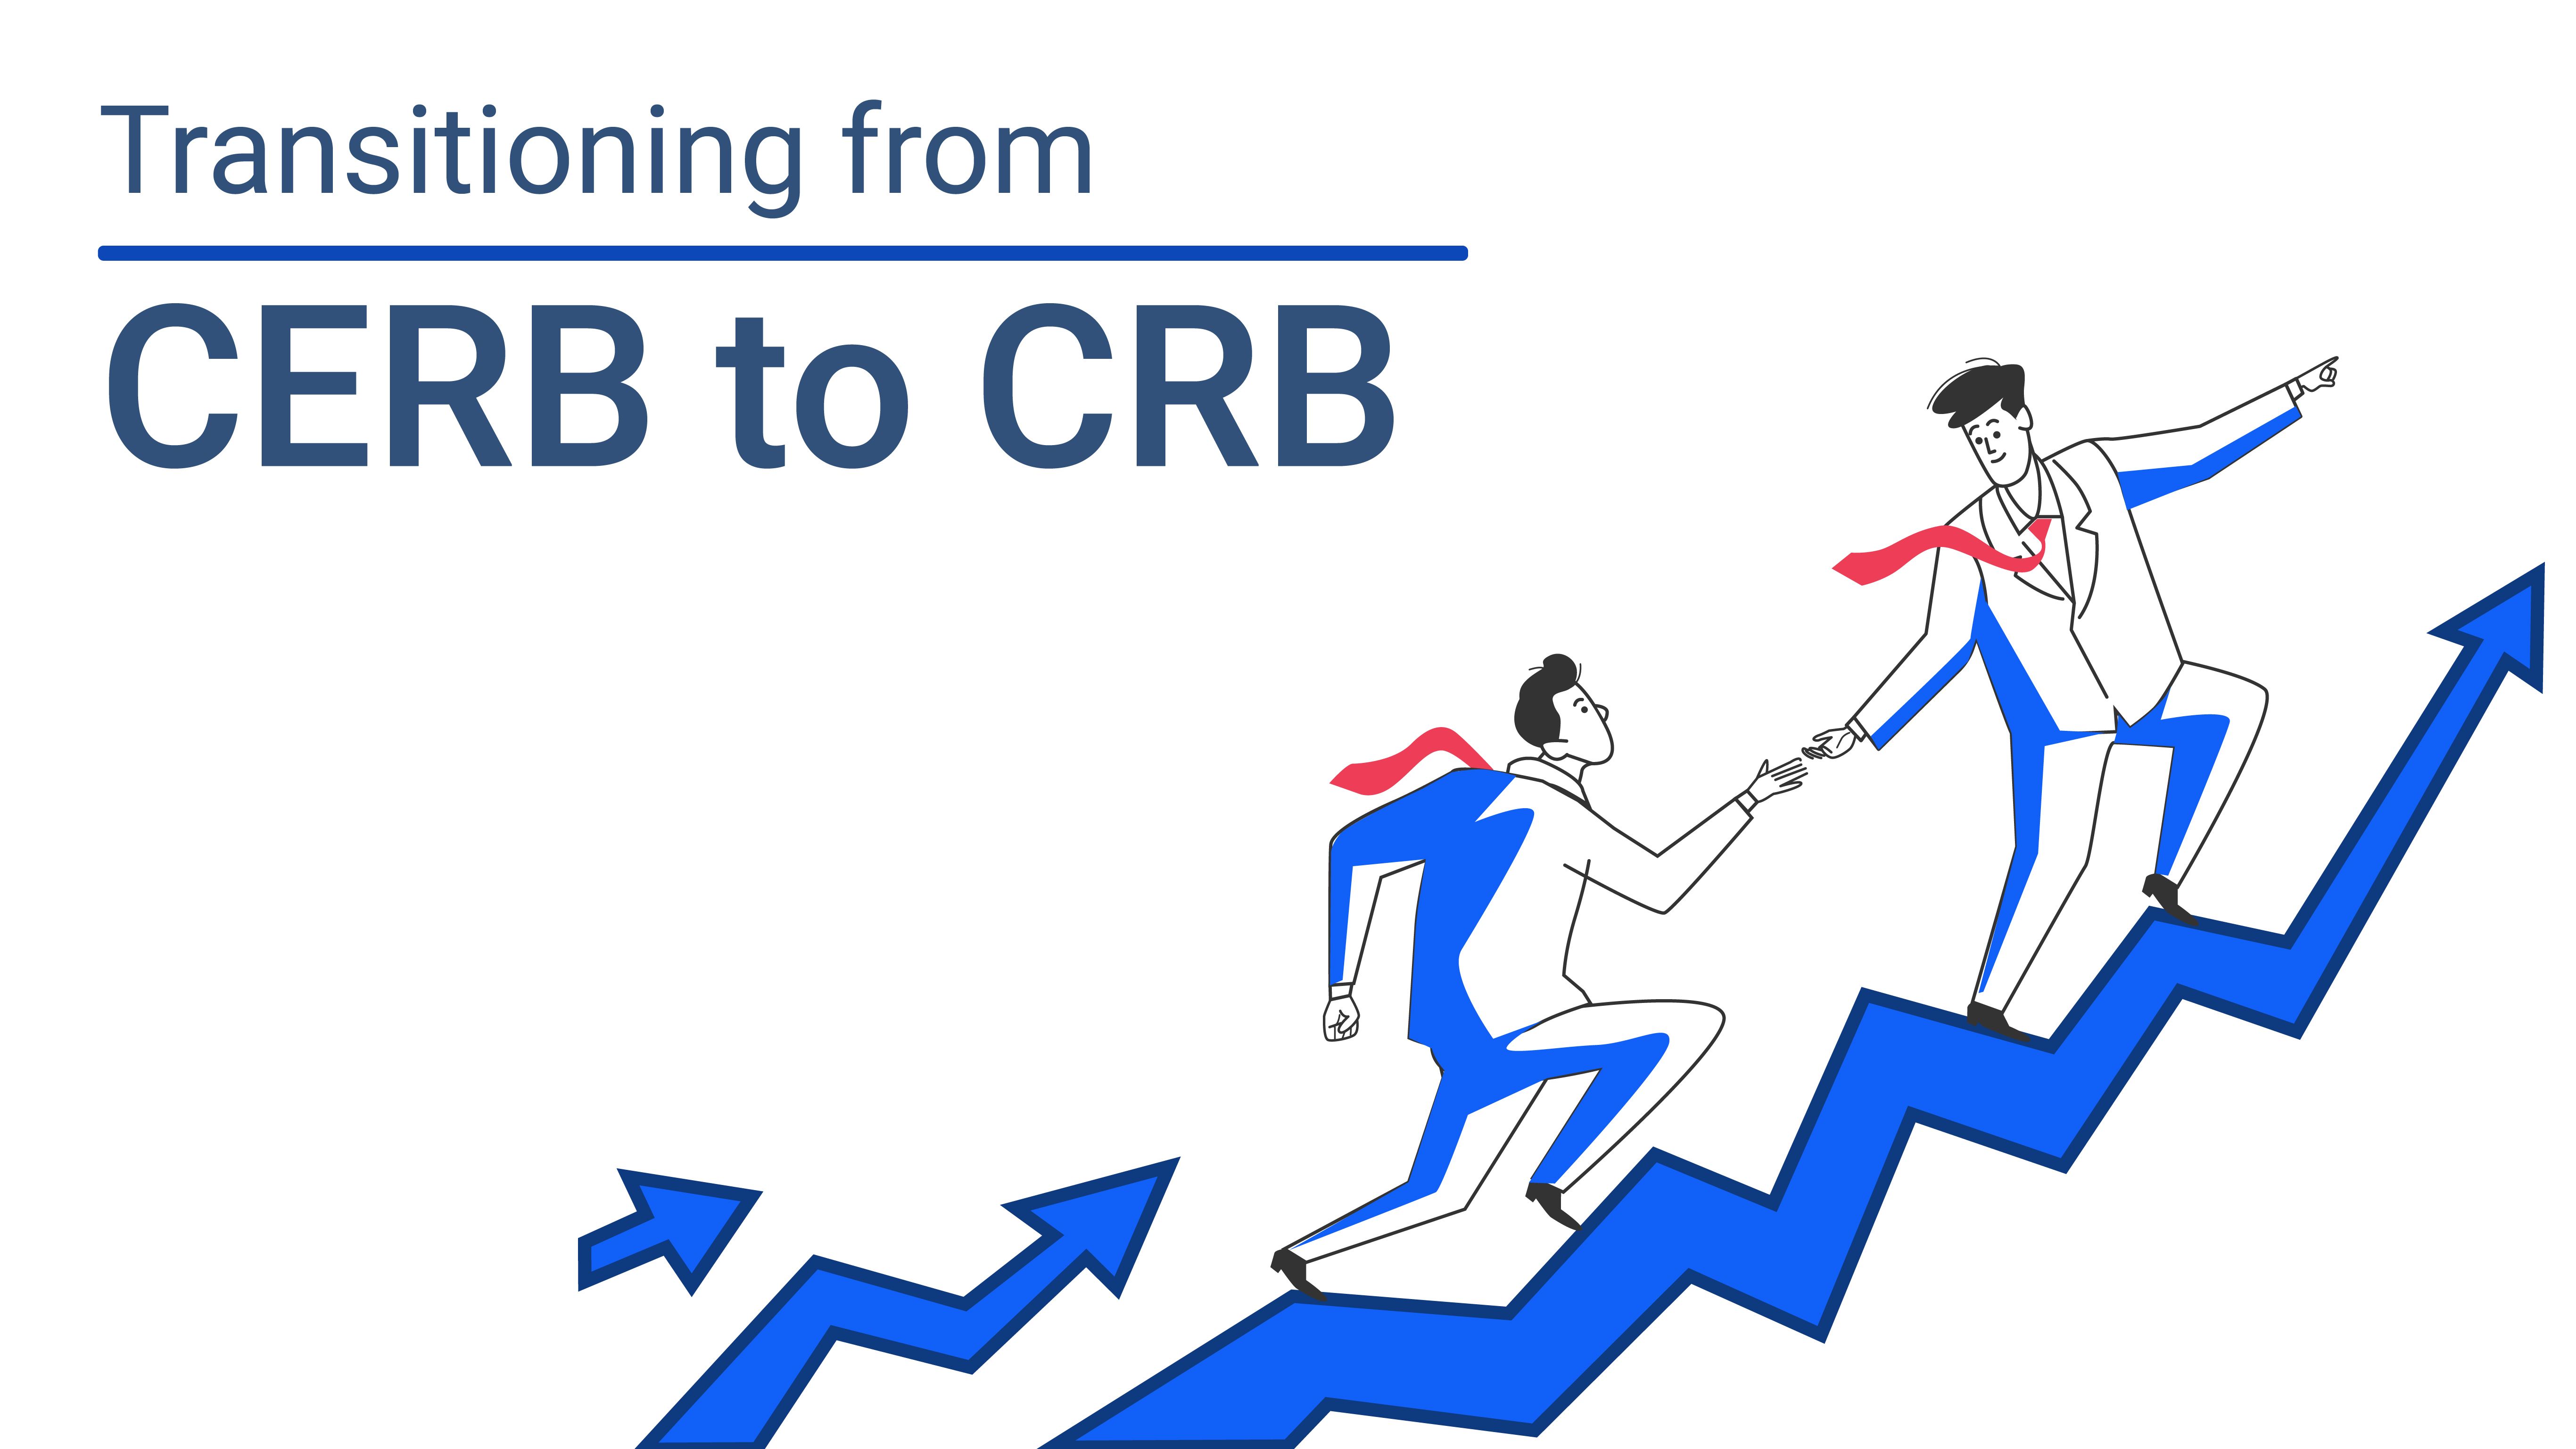 Transition of CERB to CRB